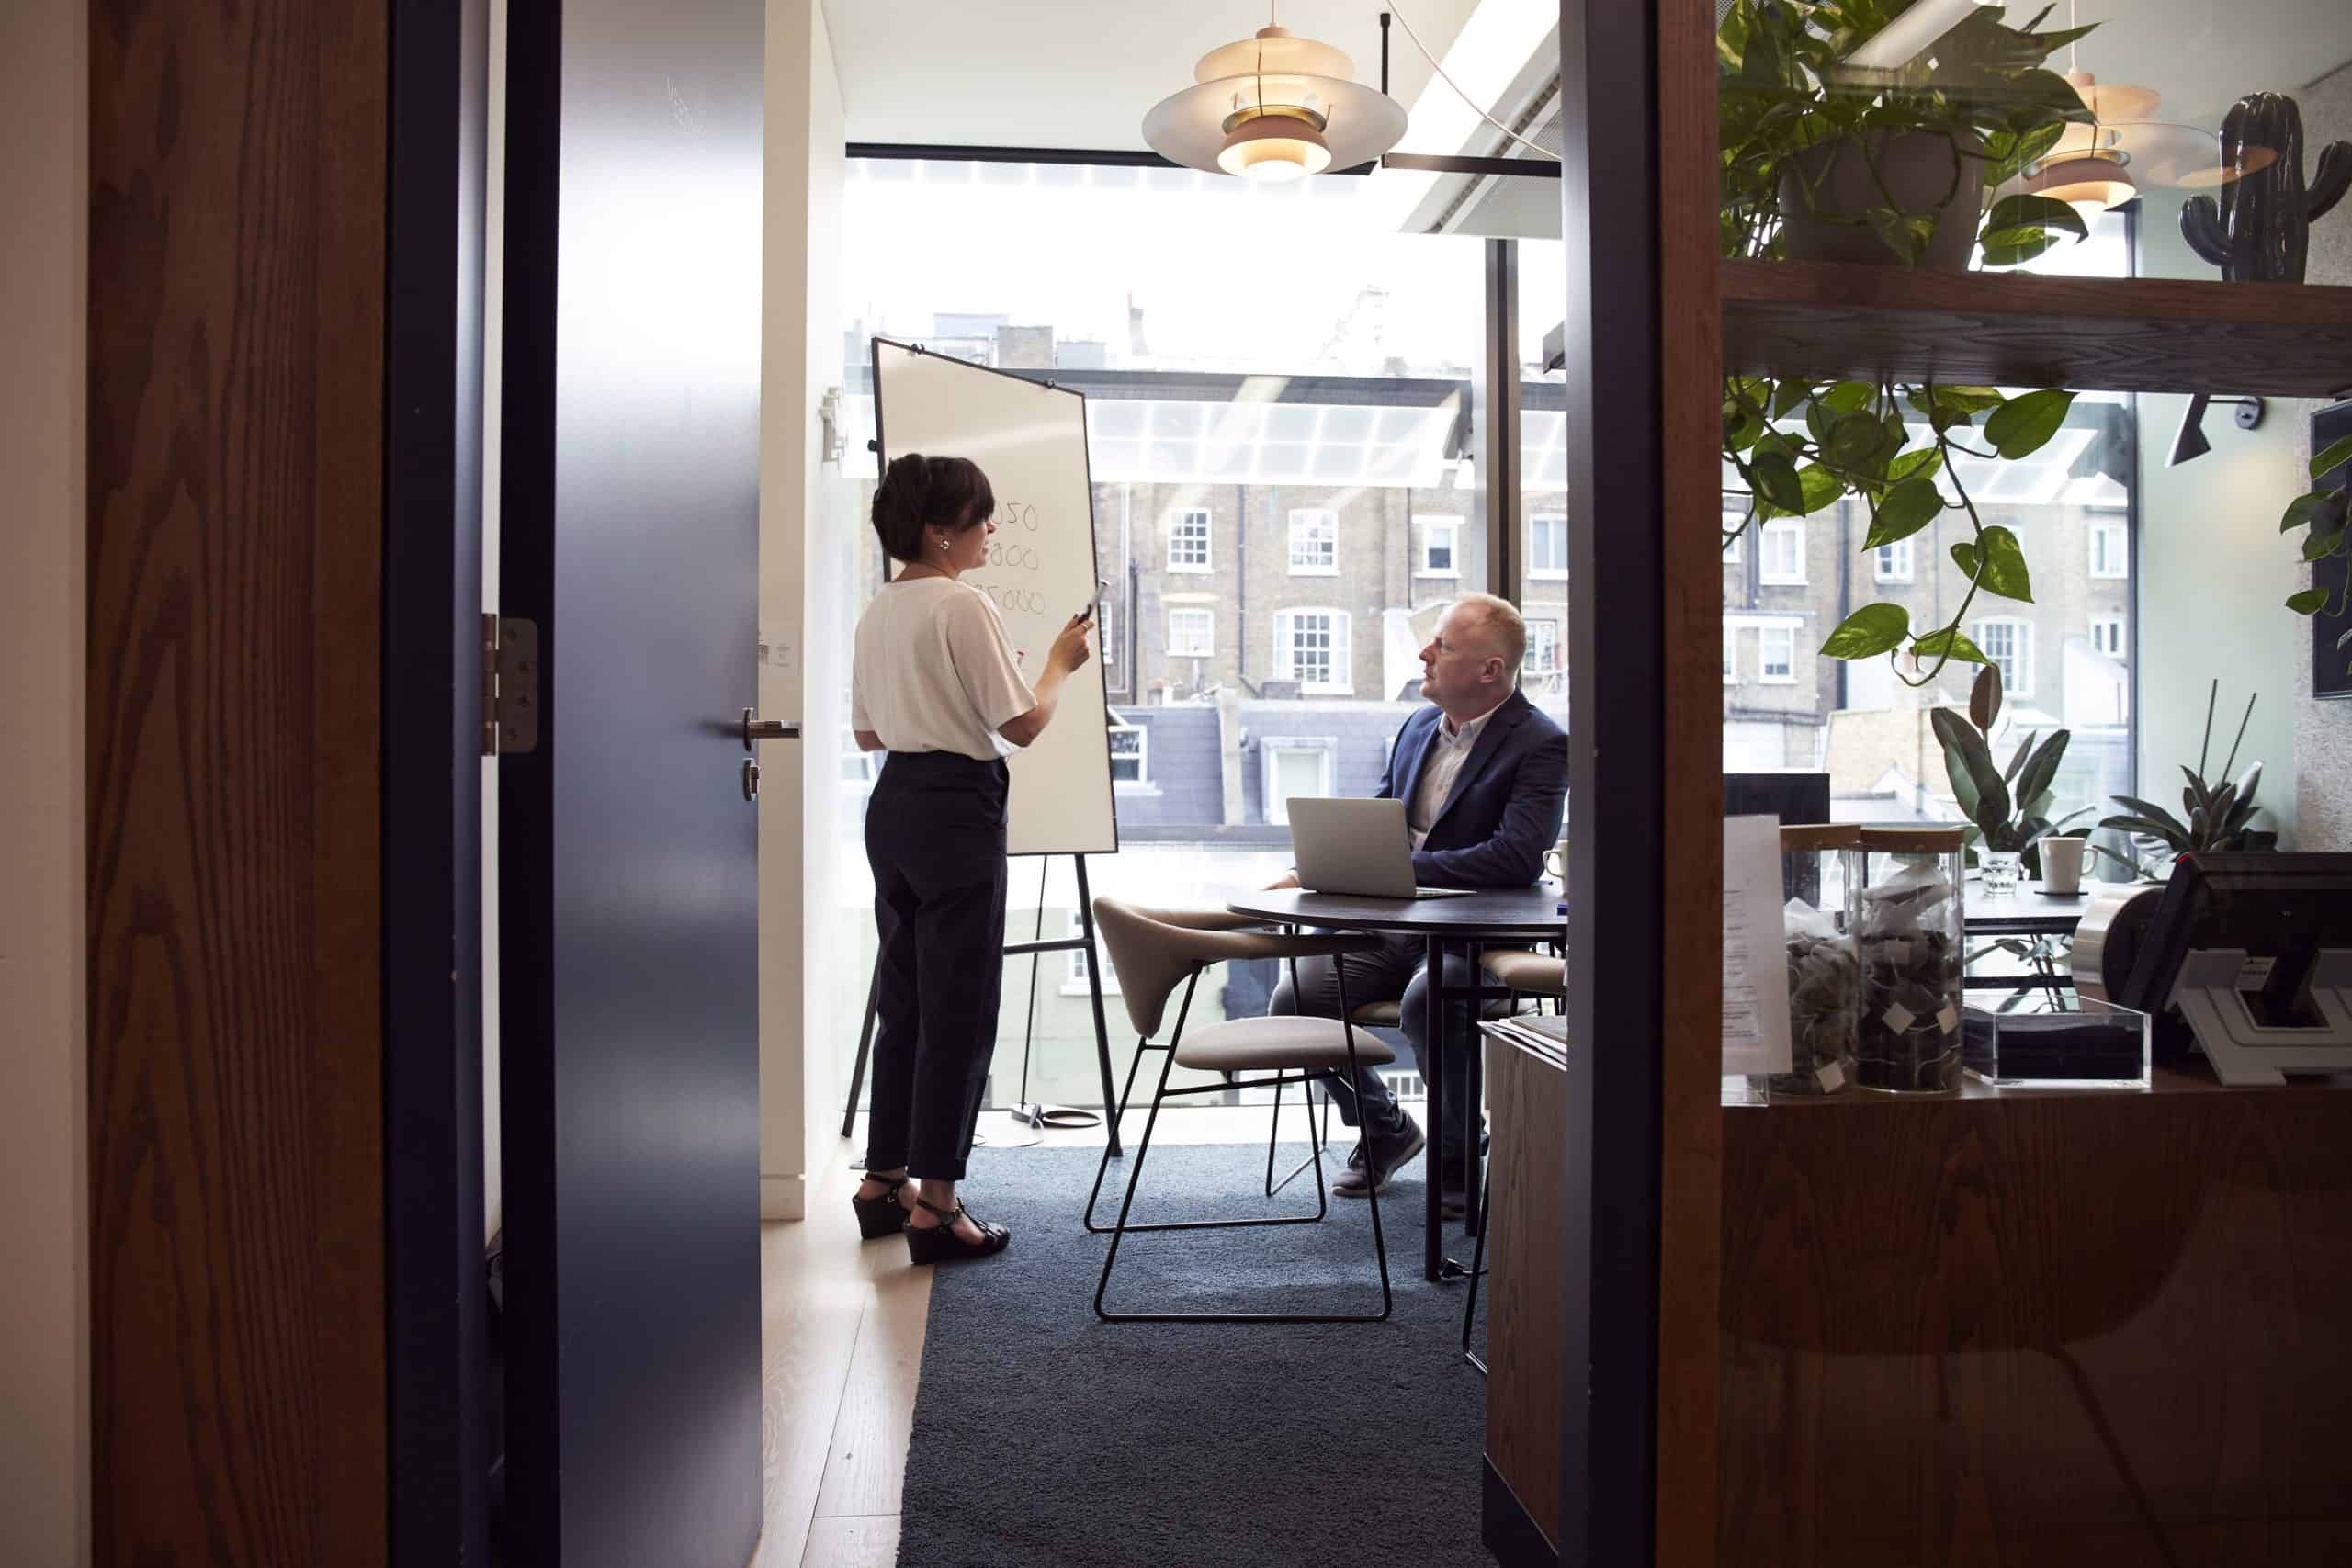 stock image showing a woman talking to a man in an office about a marketing audit